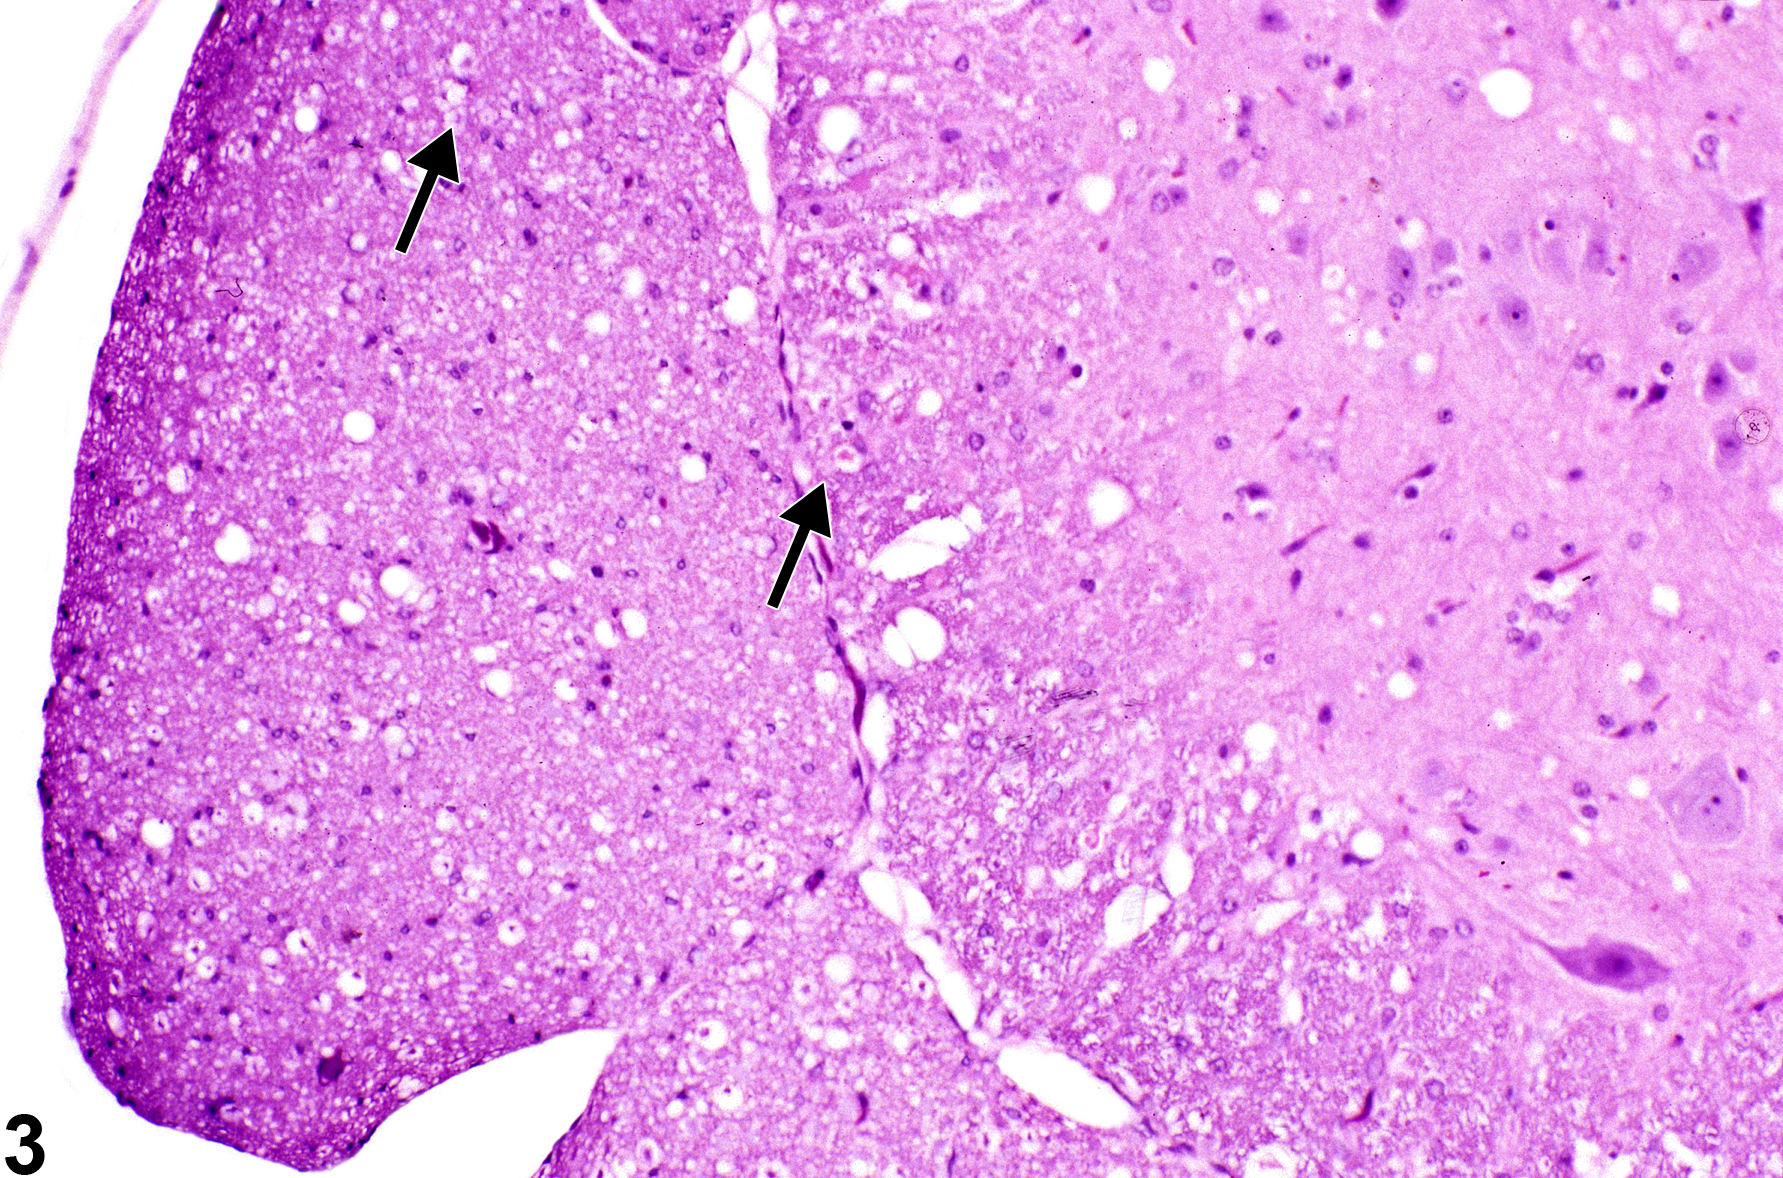 Image of axonopathy in the spinal cord from a male B6C3F1 mouse in a subchronic study